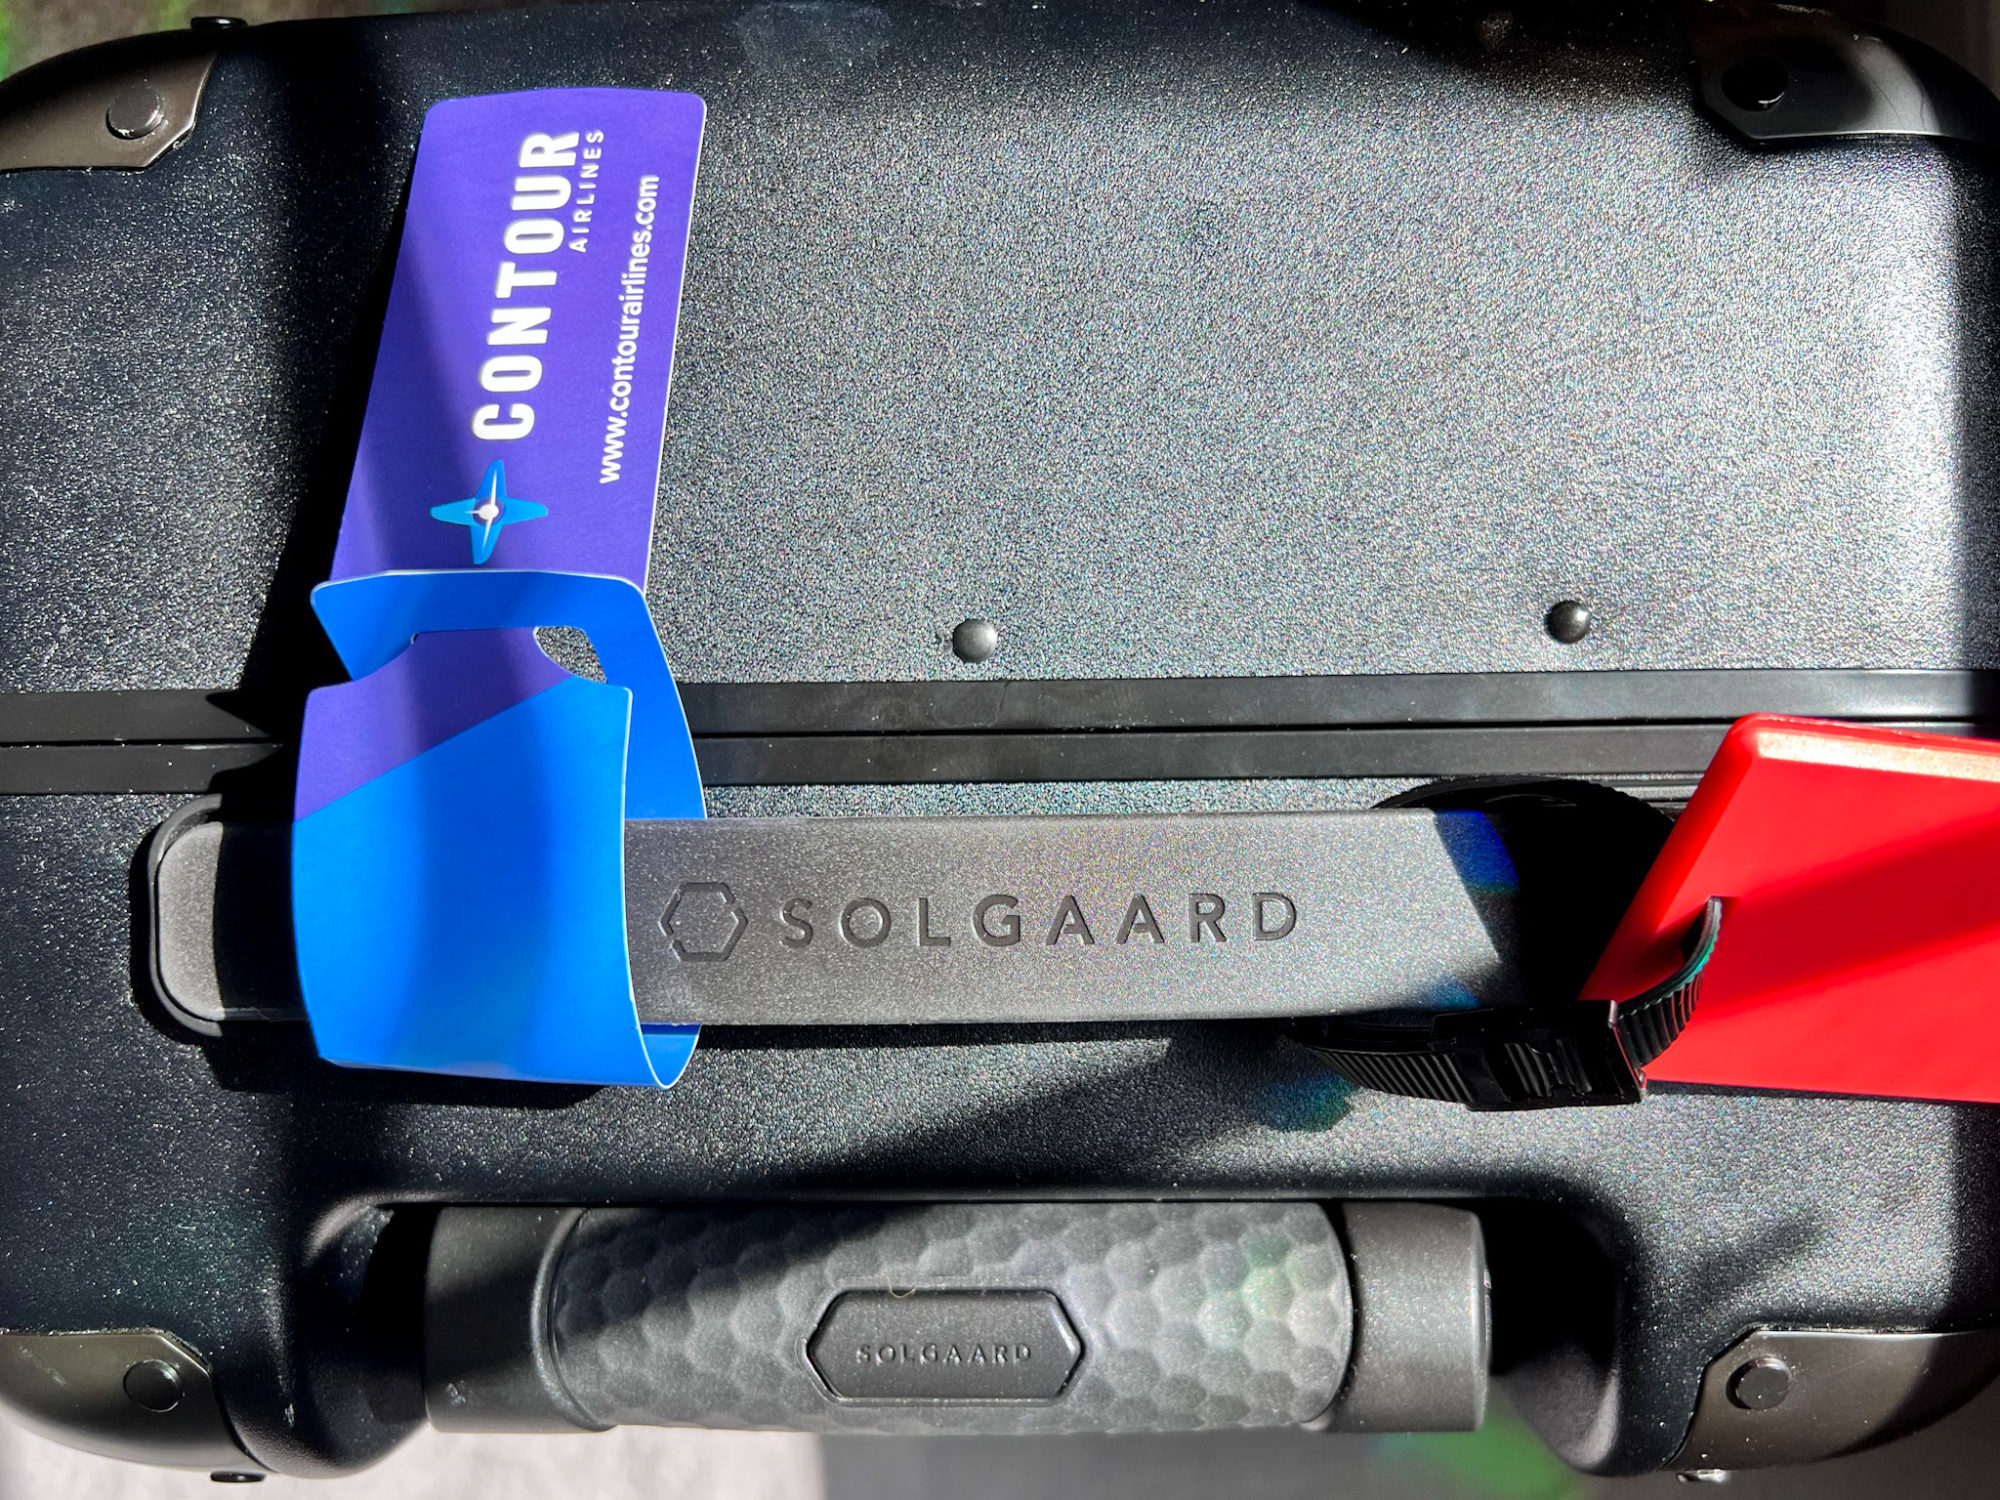 A Solgaard suitcase with a Contour tag